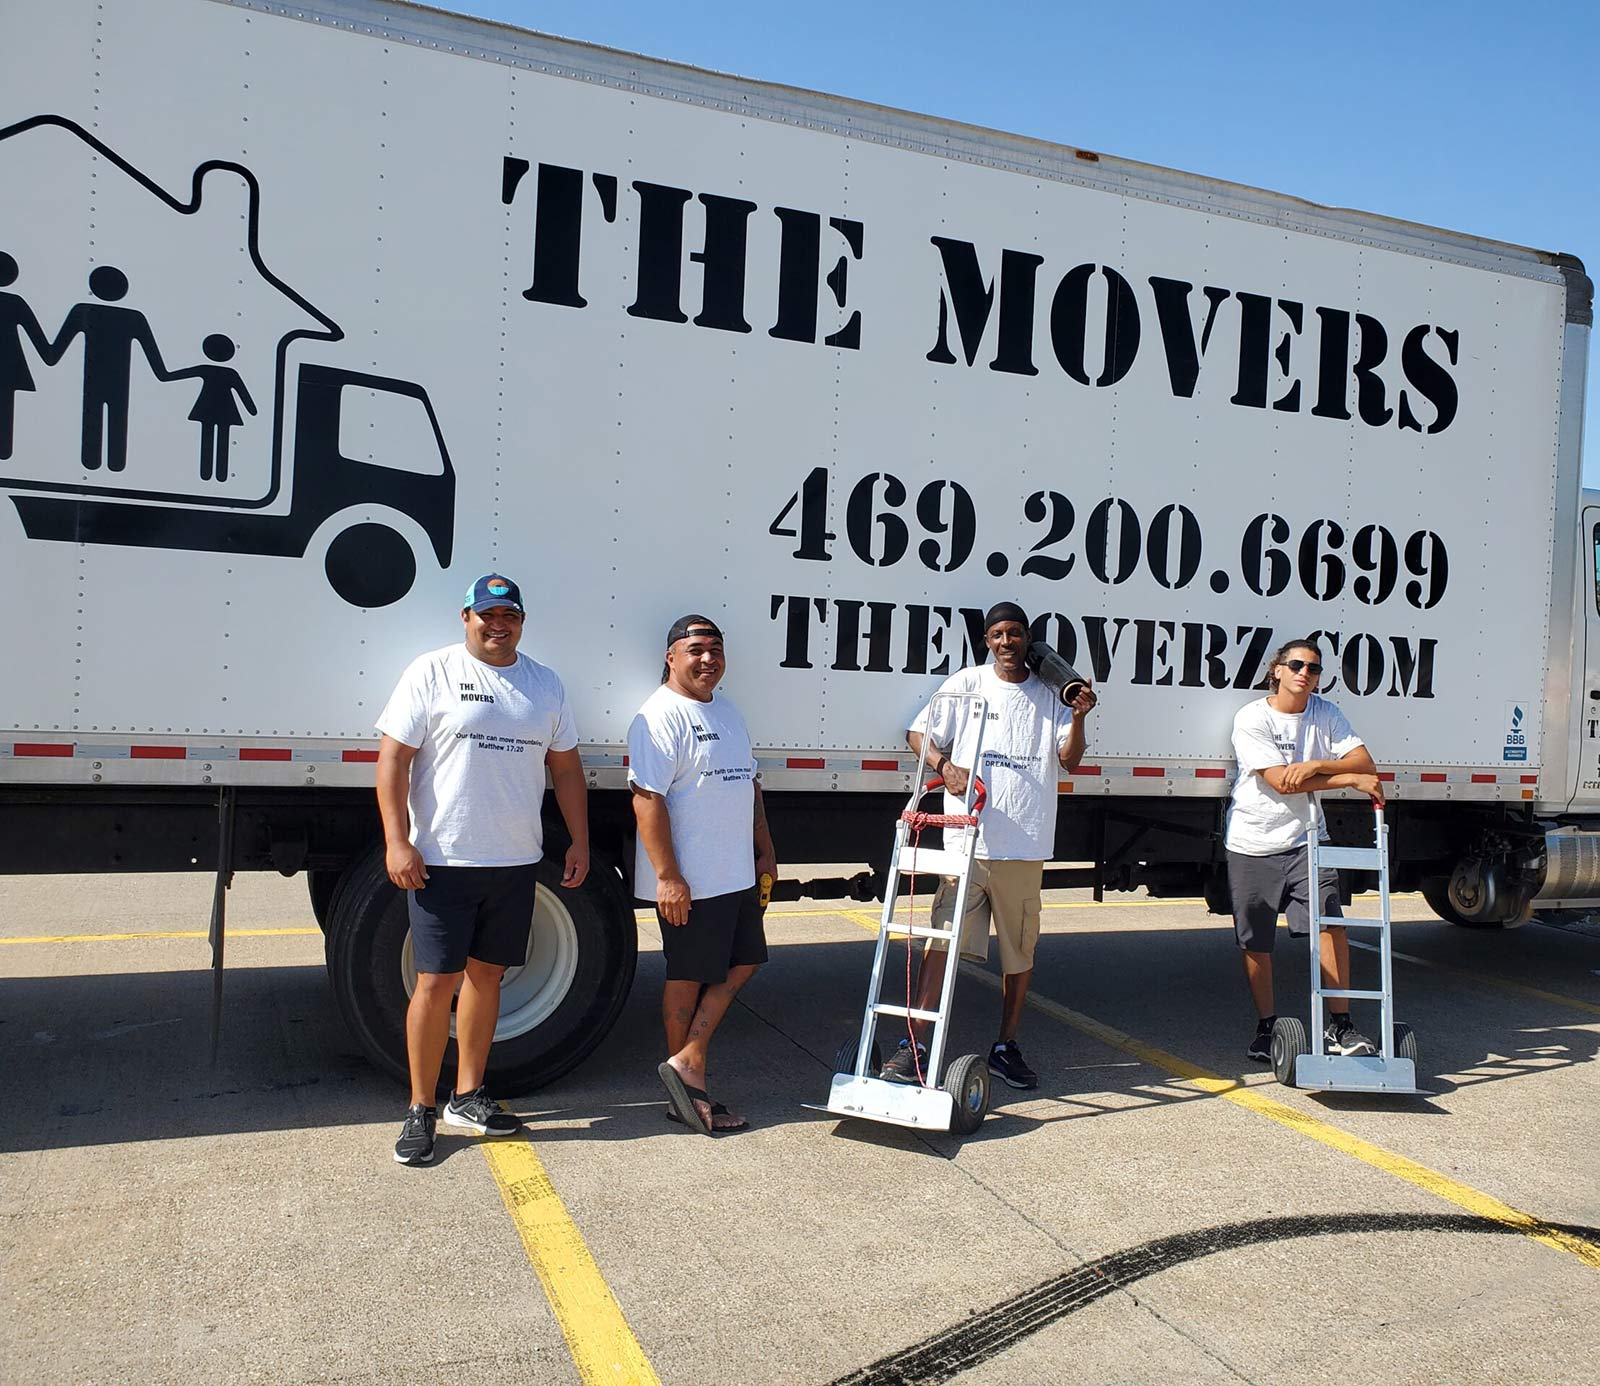 Expert moving crew ready to tackle any moving job that comes their way.